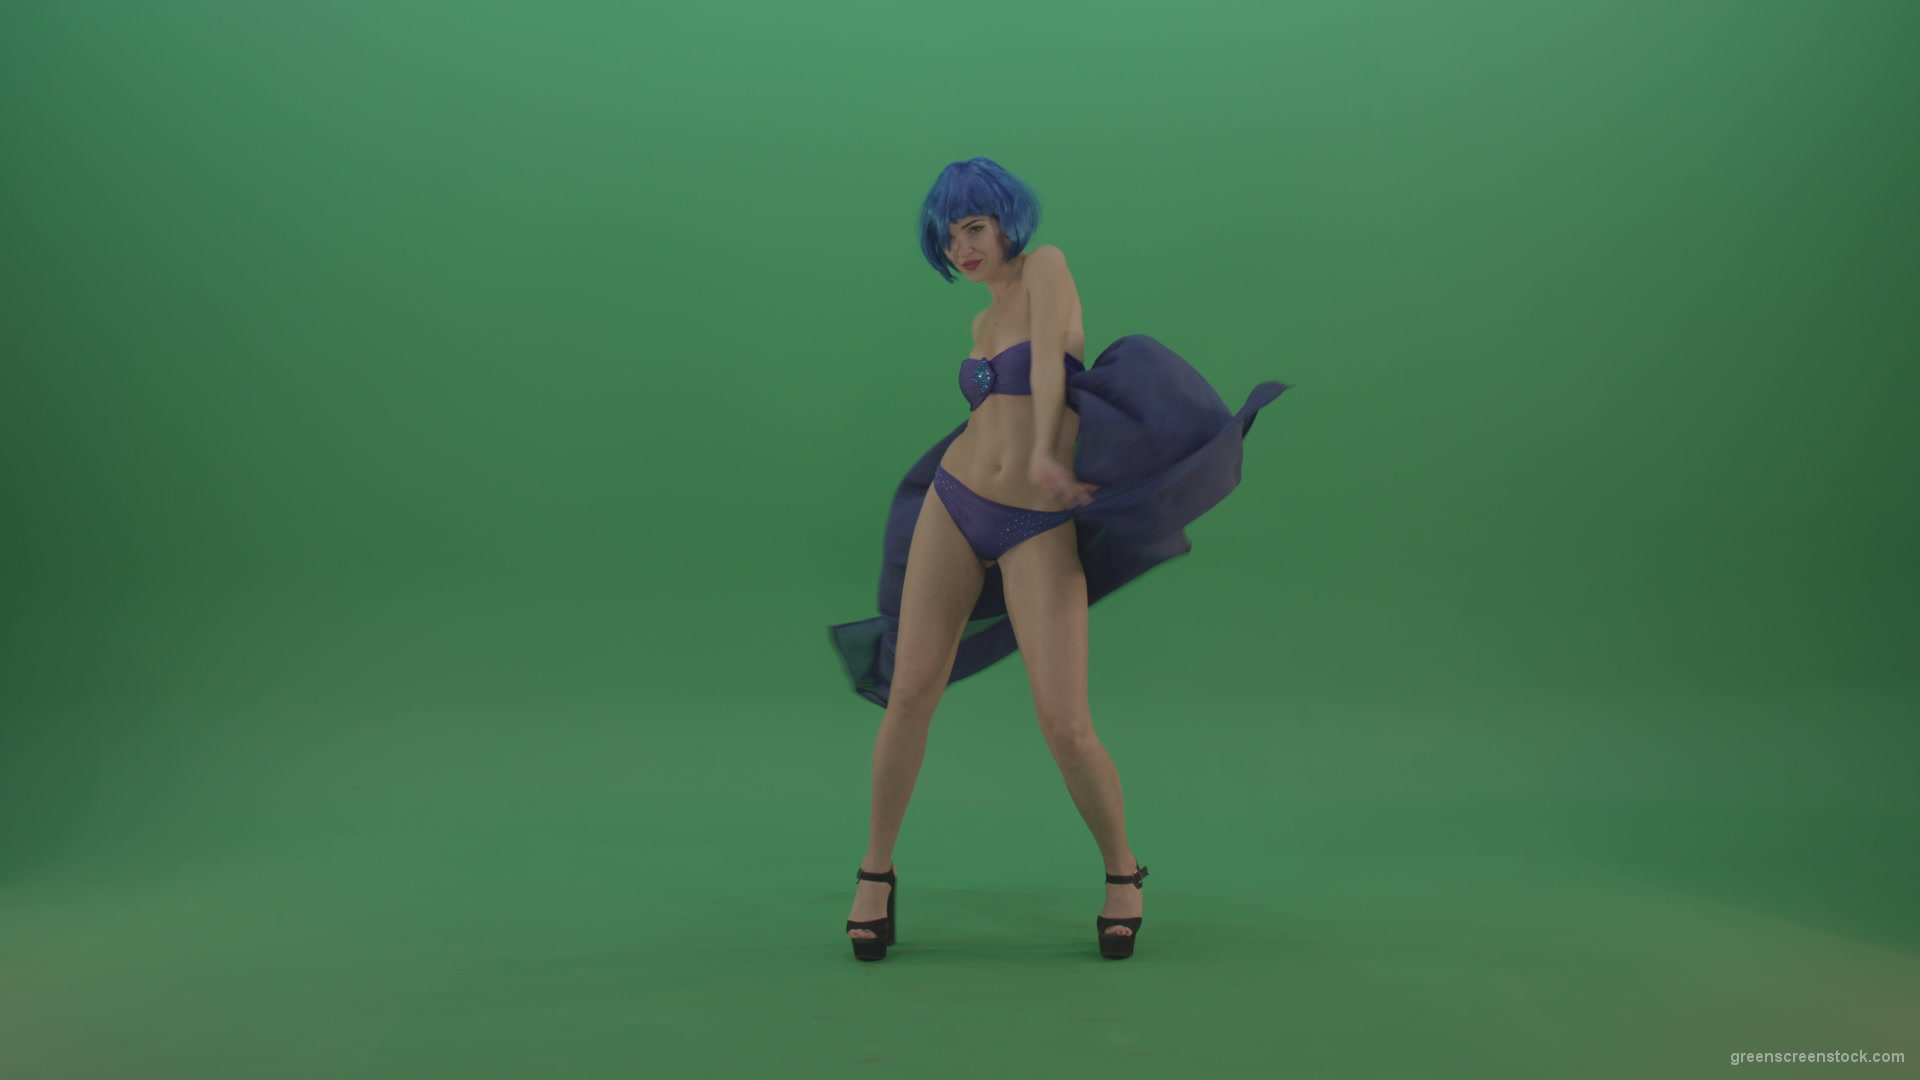 Full-size-erotic-young-girl-dancing-go-go-with-blue-dress-curtain-on-green-screen-1_005 Green Screen Stock